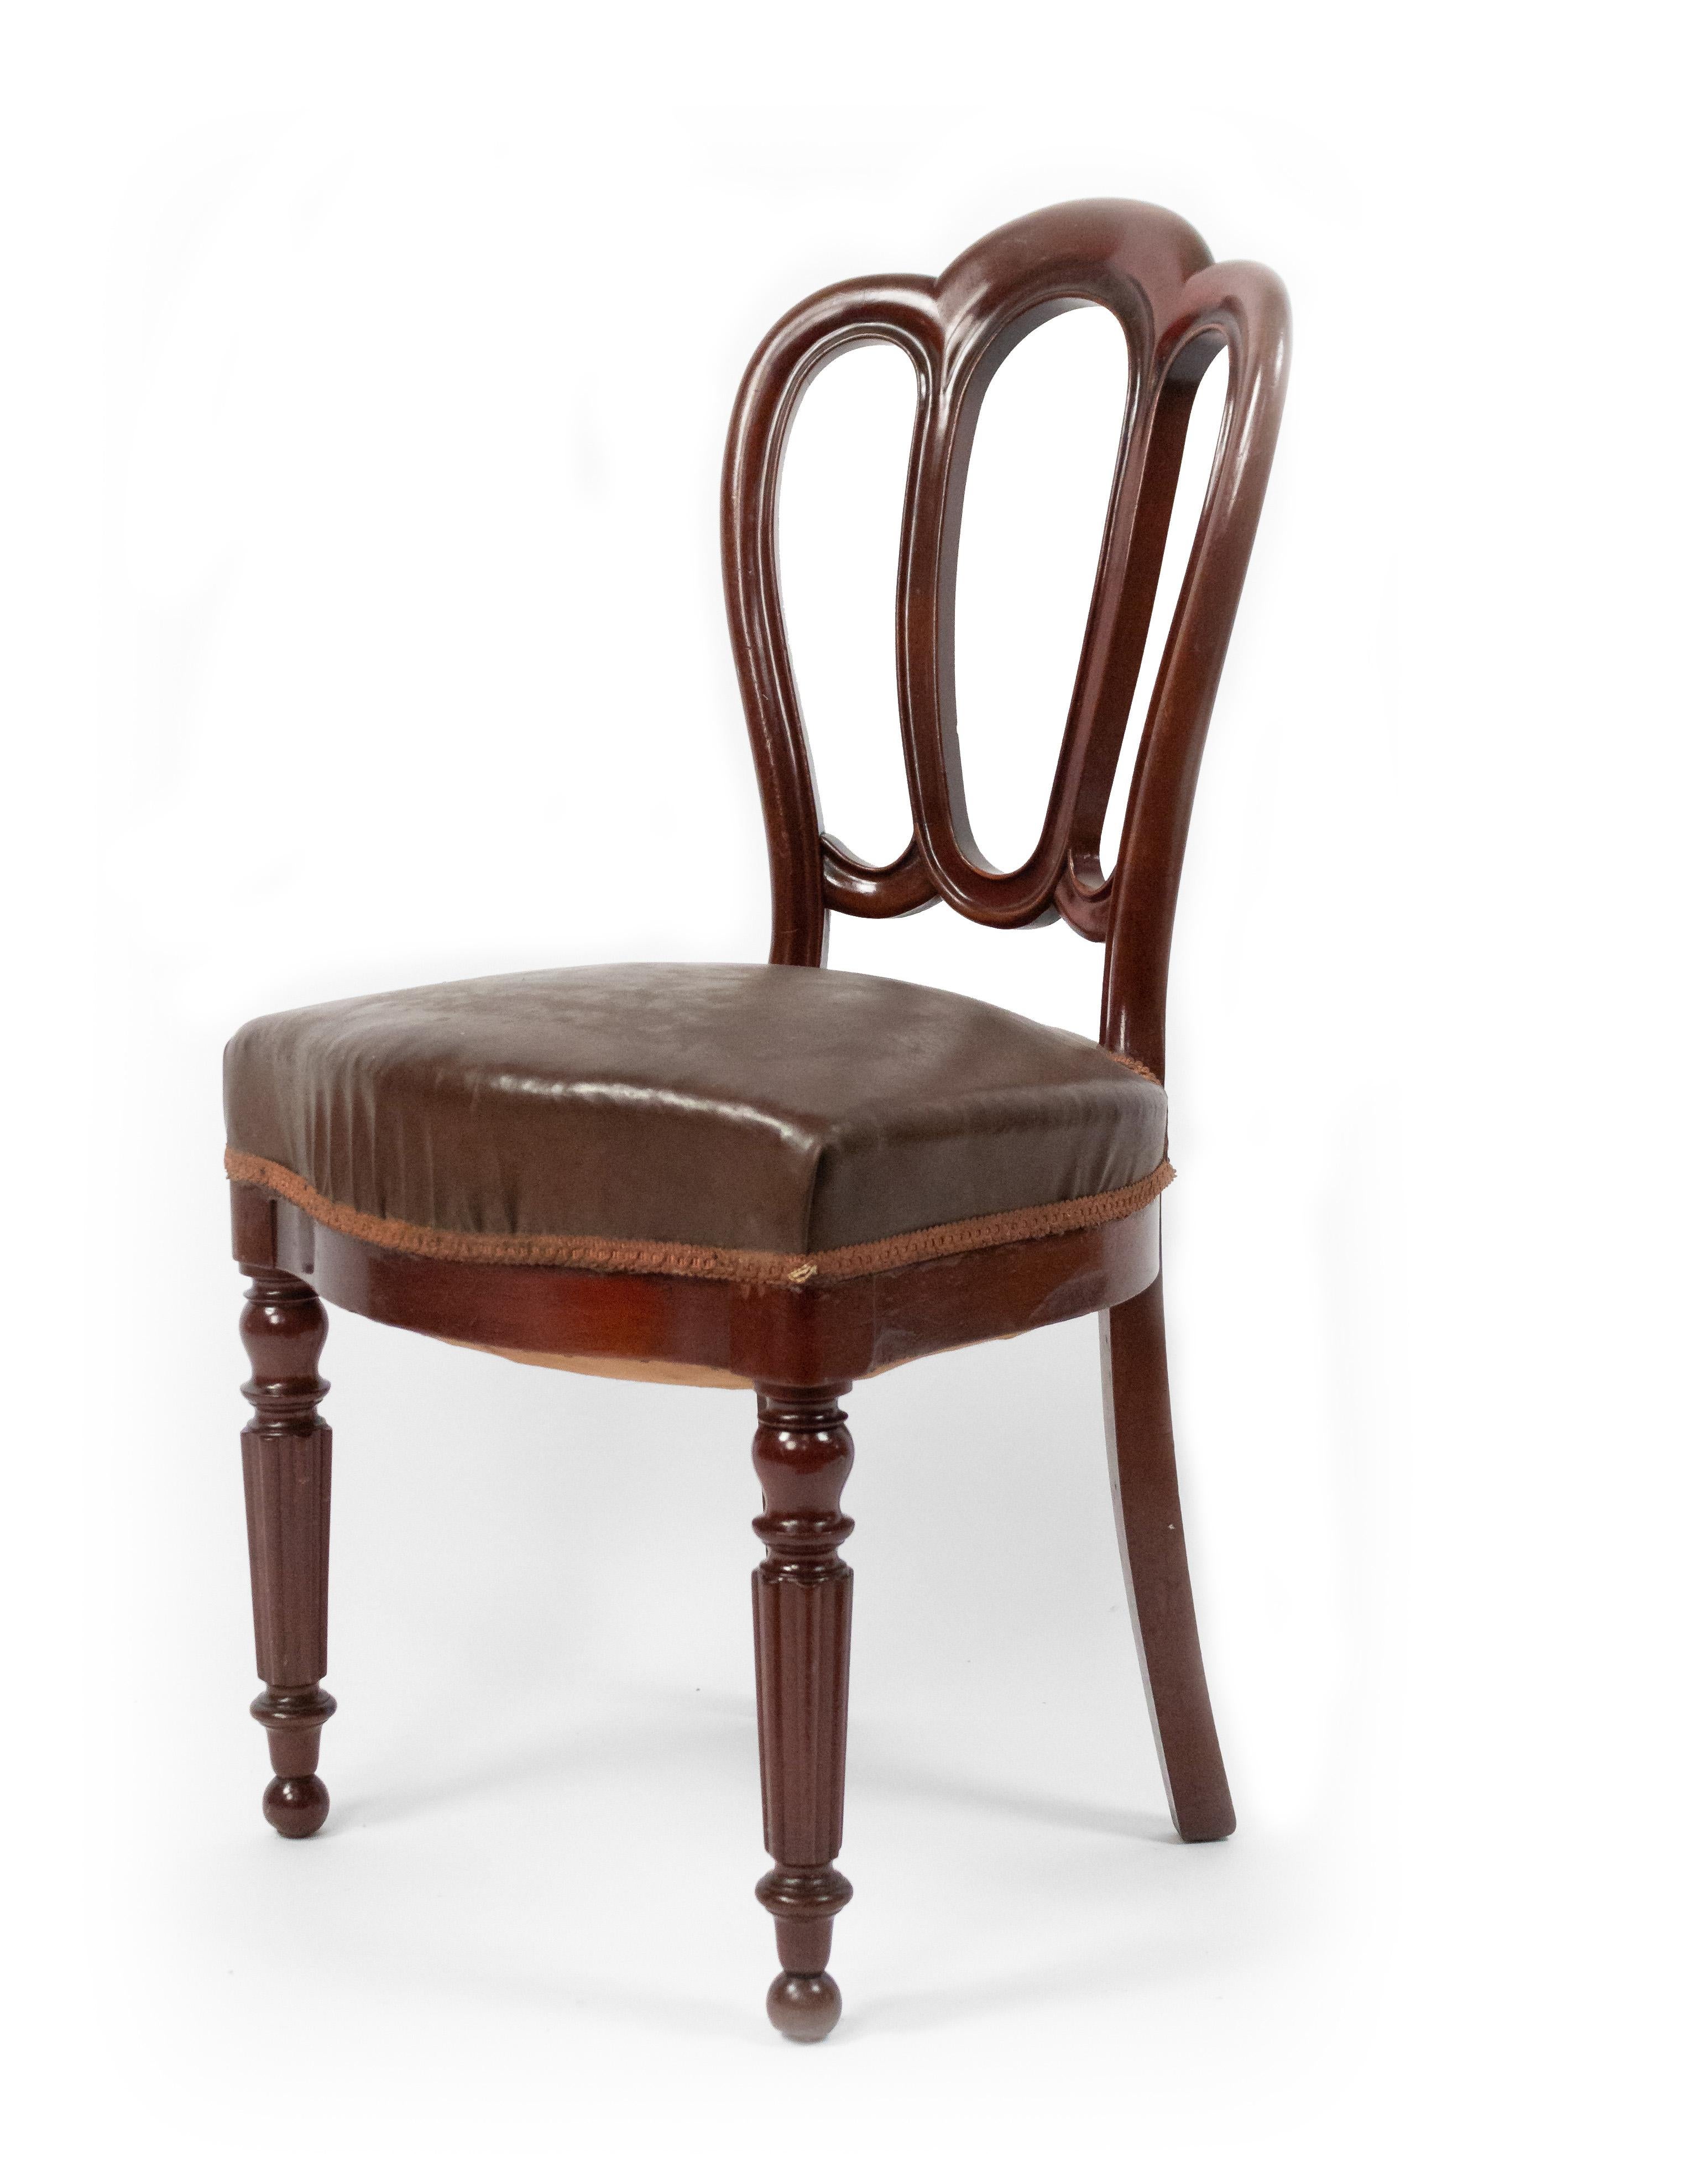 Set of 10 French Victorian (late 19th century) mahogany side / dining chairs with shaped open backs, leather seats, and fluted front legs.